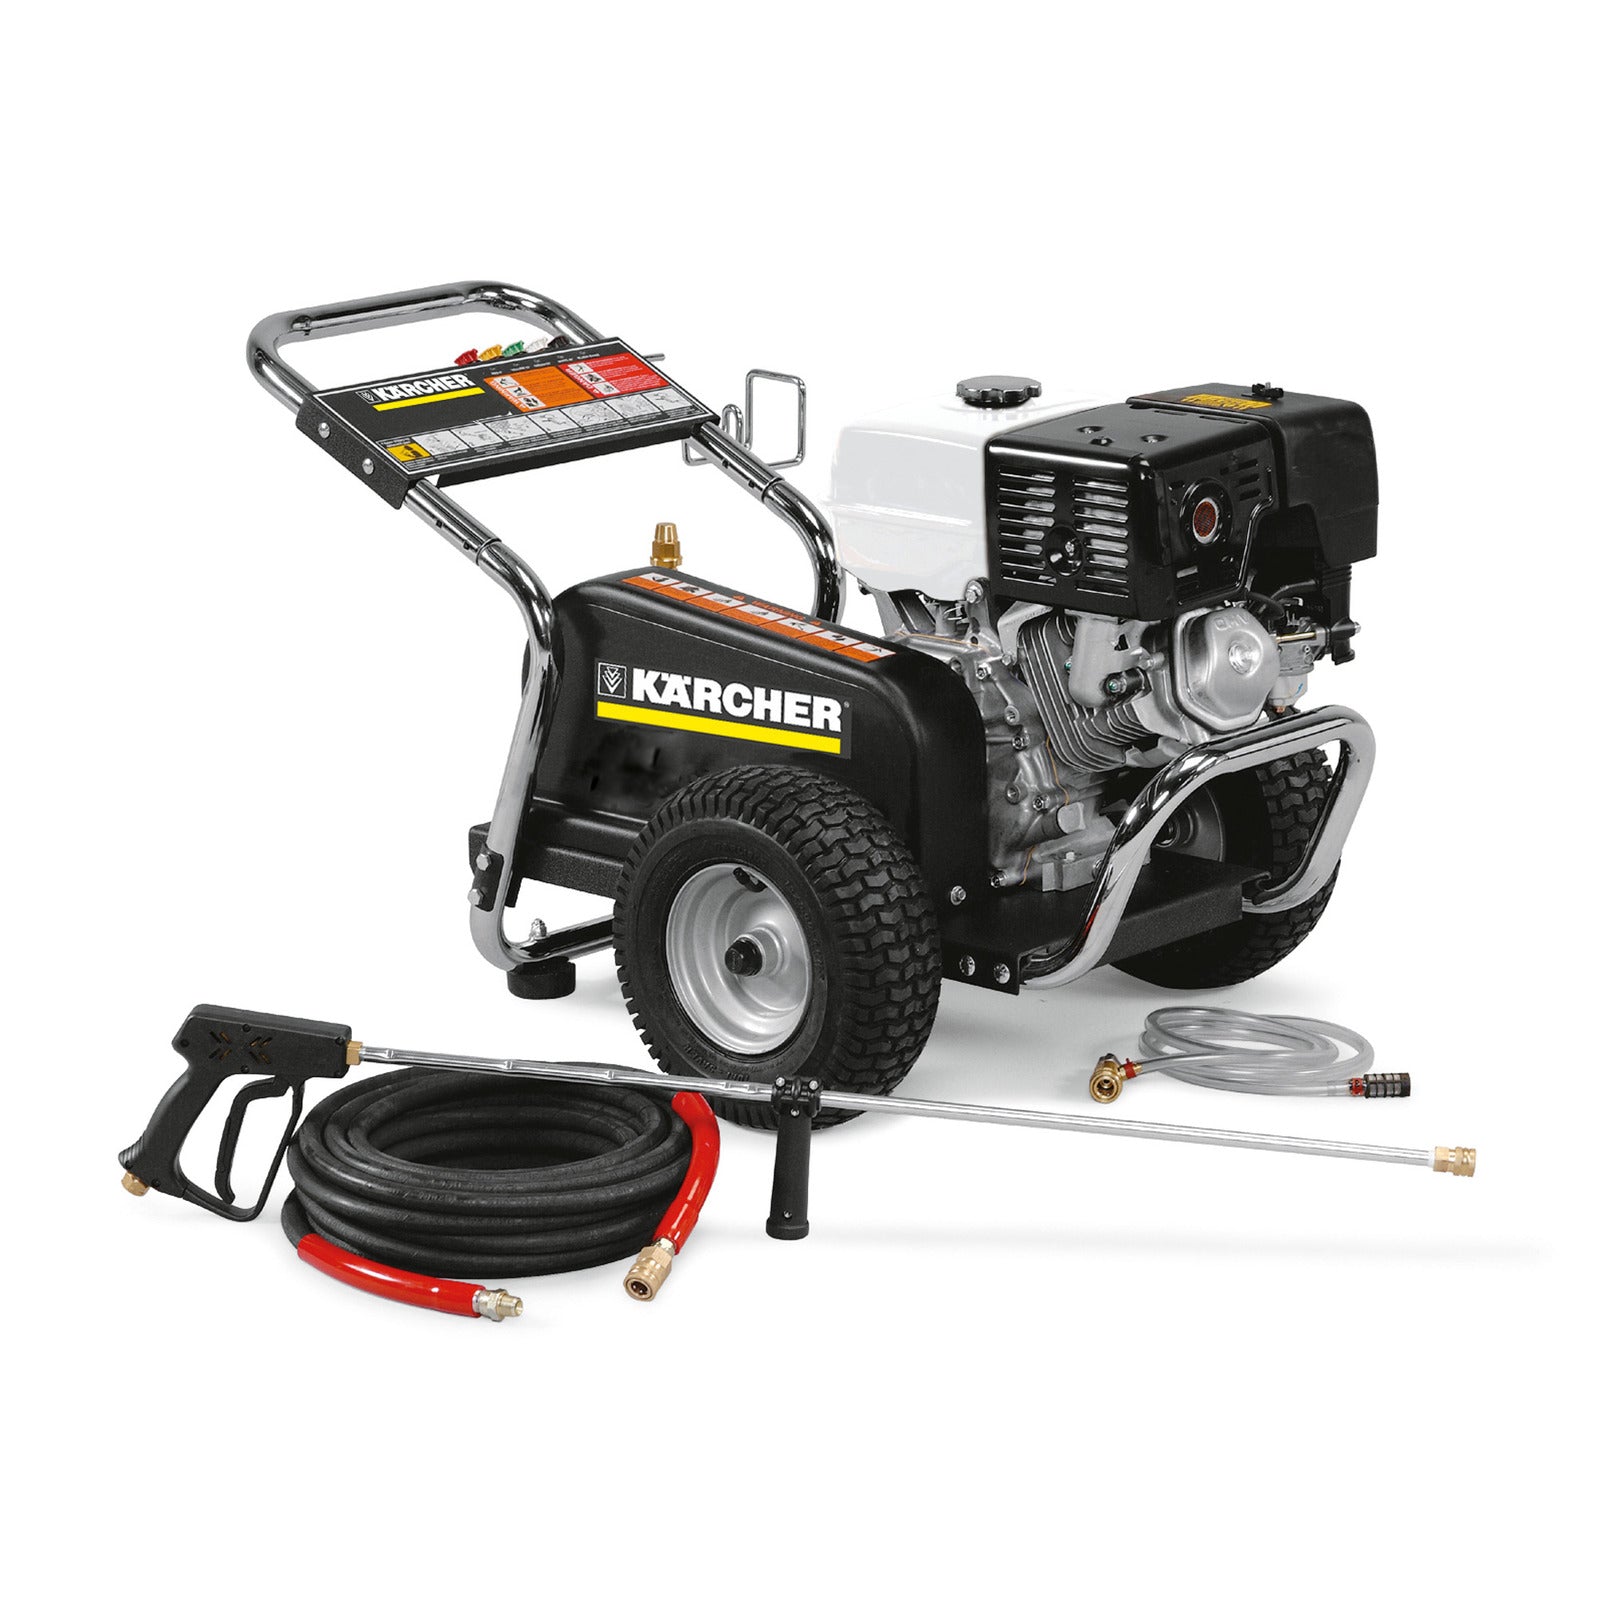 Karcher HD PB CART HD 3.0/40 PB (1.575-155.0) Cold Water Pressure Washer - Gas Powered - CalCleaningEquipment